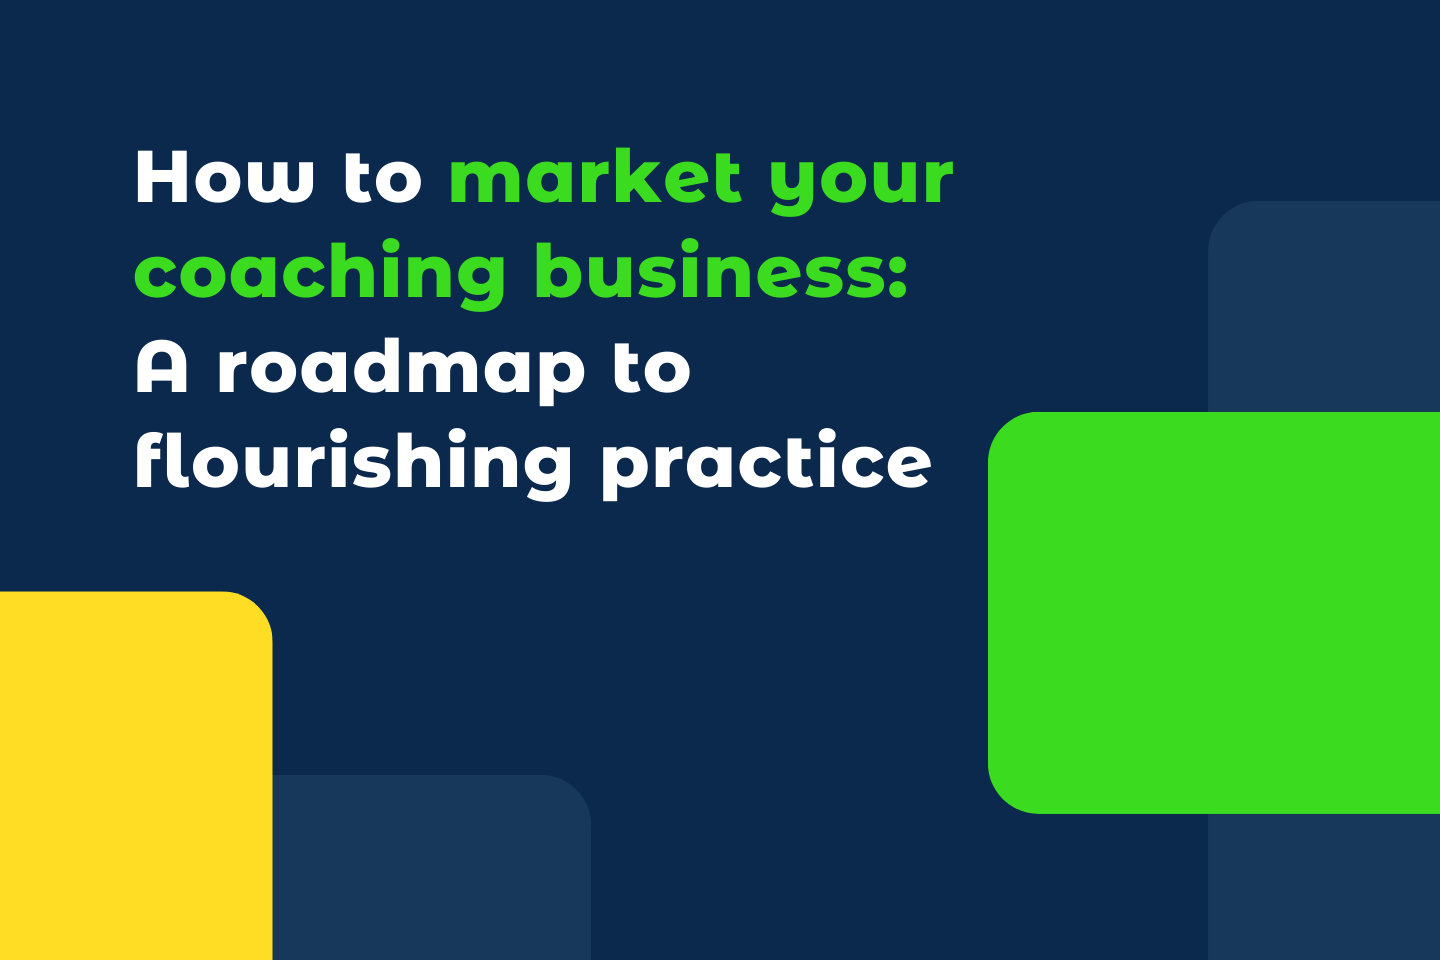 How to market your coaching business: A roadmap to flourishing practice